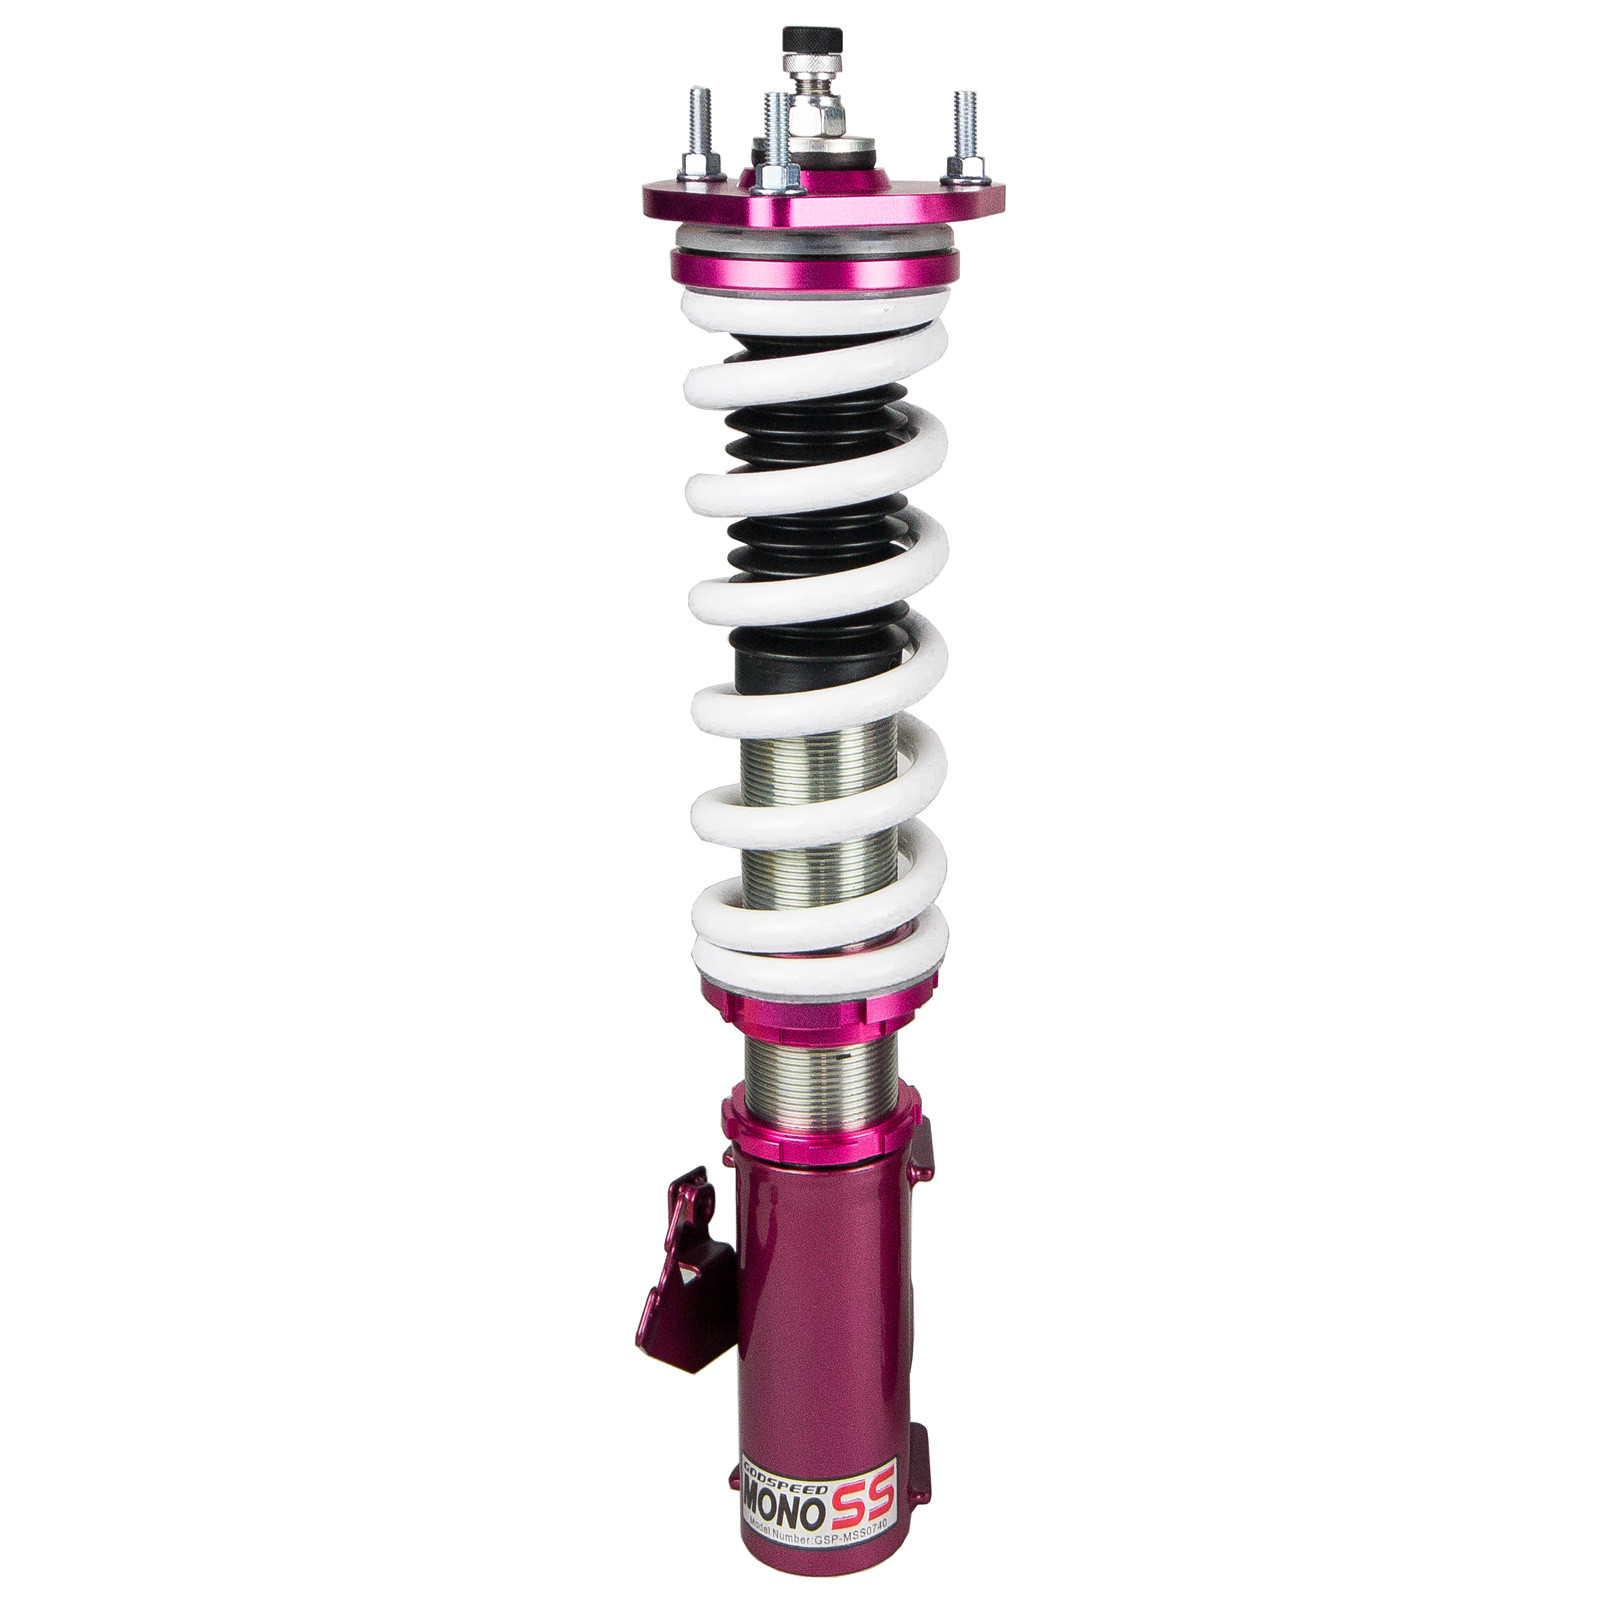 R9-HS2-069 made for Nissan Sentra 1991-94 Hyper-Street II Coilovers Lowering Kit by Rev9 B13 32 Damping Level Adjustment